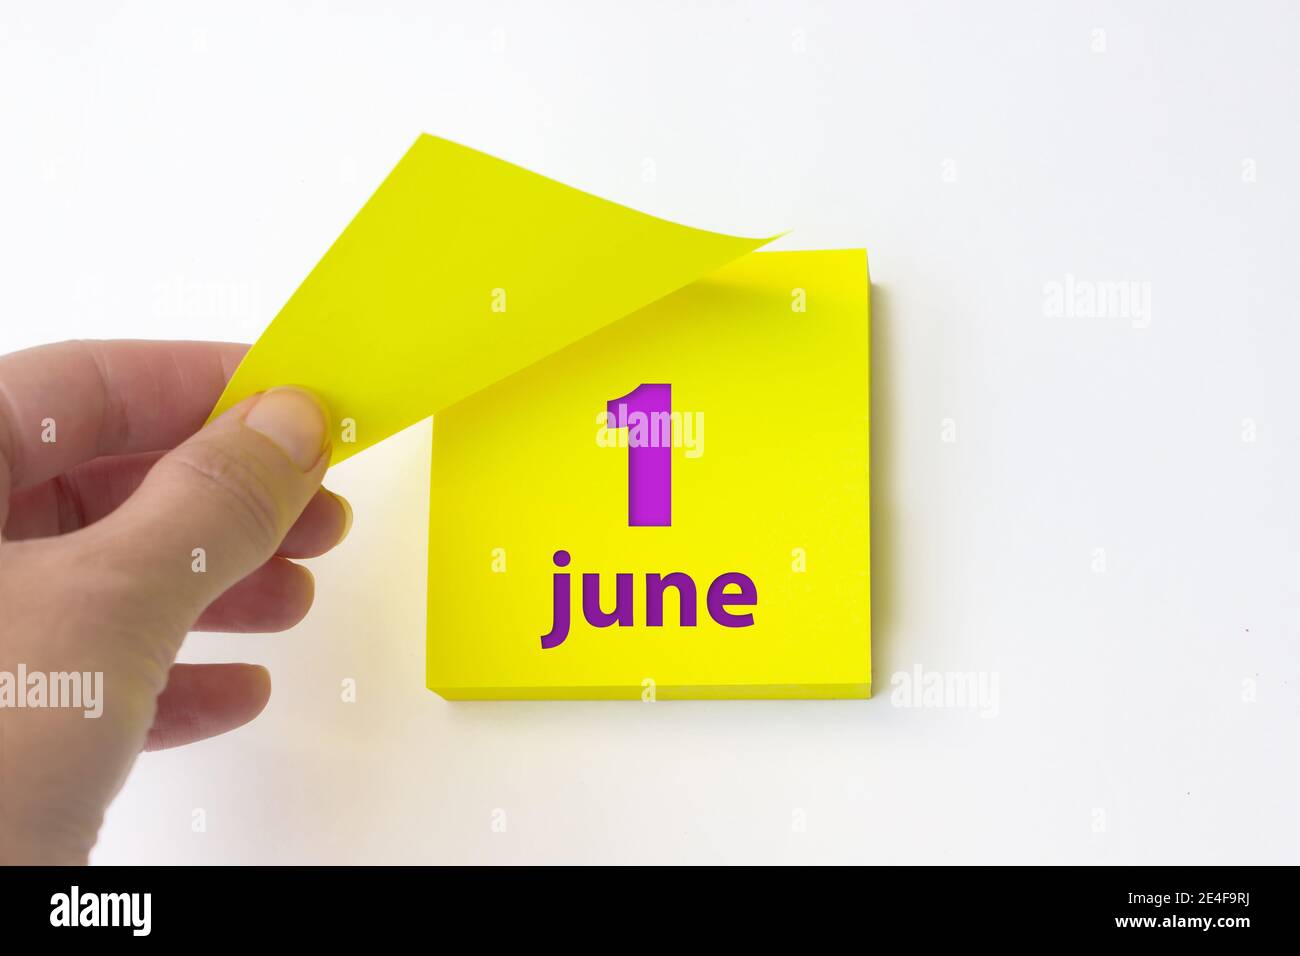 June 1st . Day 1 of month, Calendar date. Hand rips off the yellow sheet of the calendar. Summer month, day of the year concept Stock Photo